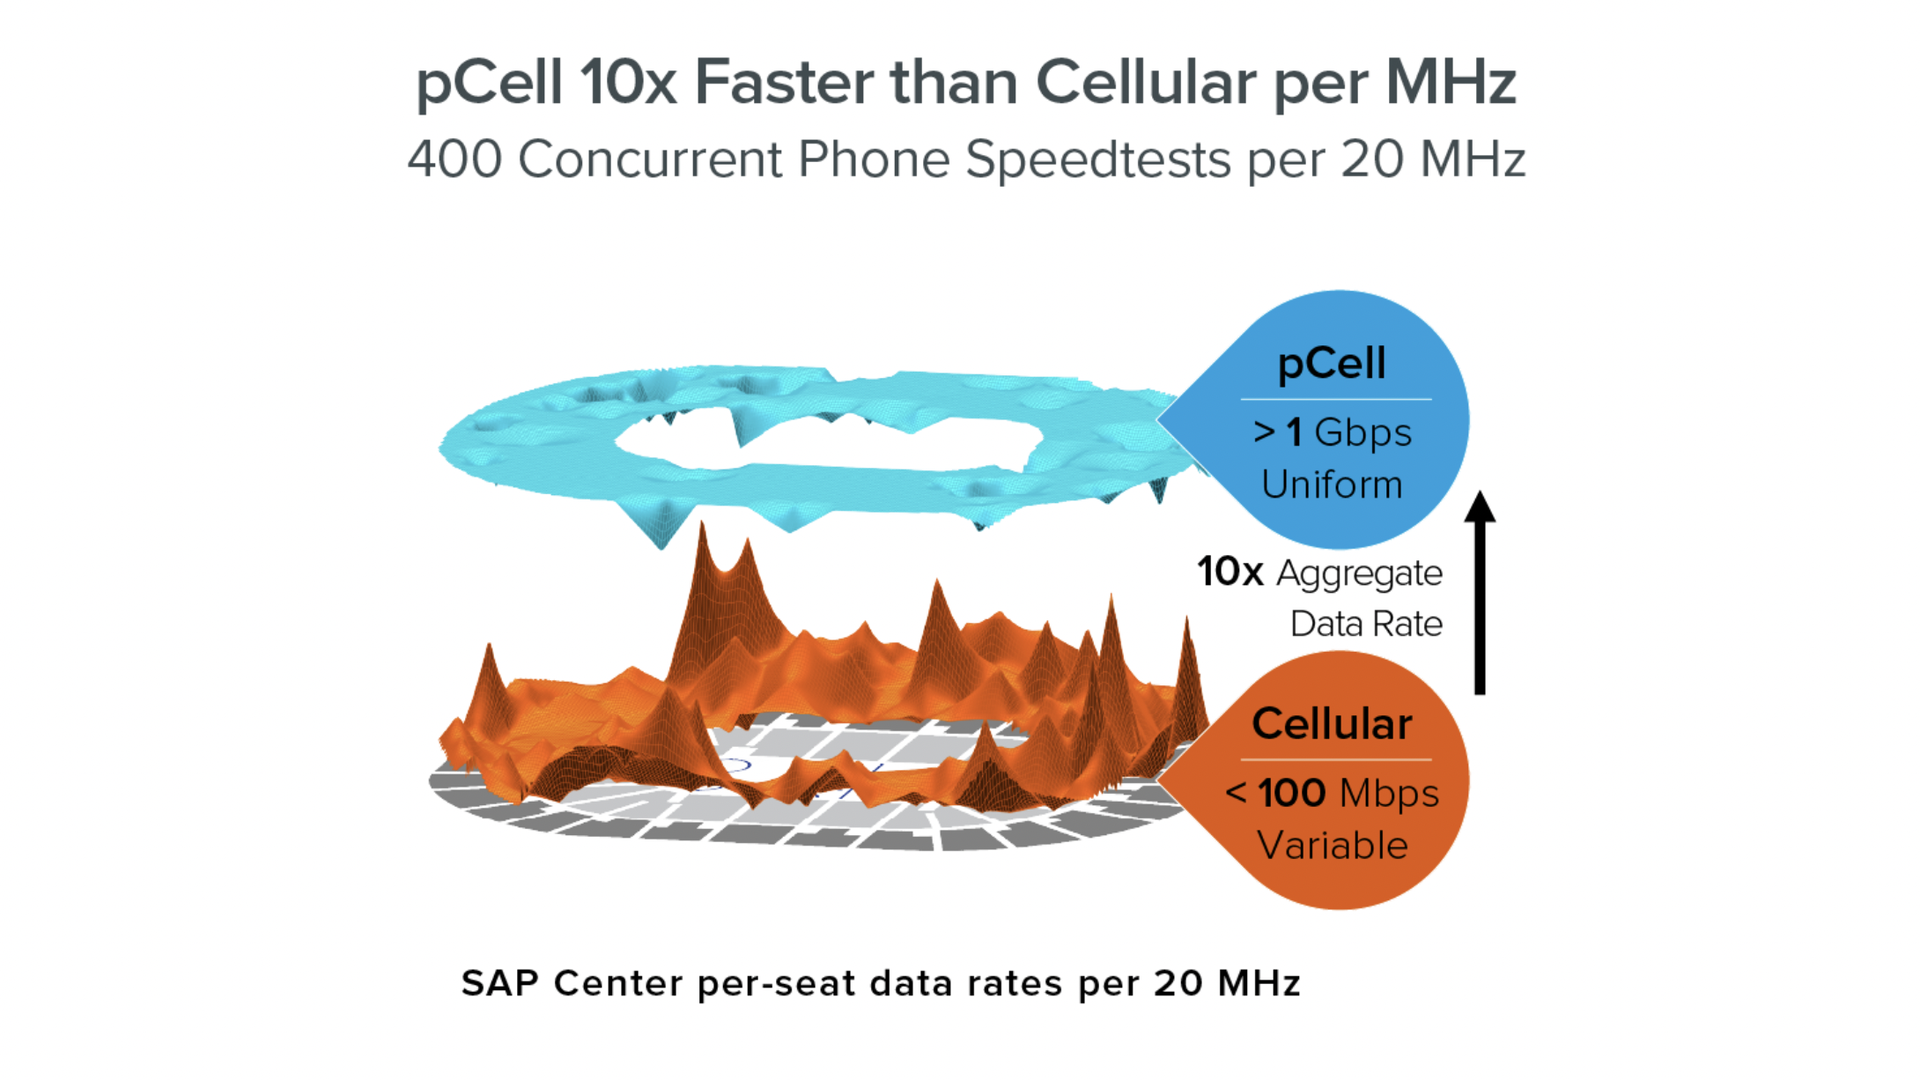 A graphic comparing the efficieny of Artemis' pCell technology vs traditional cell networks.